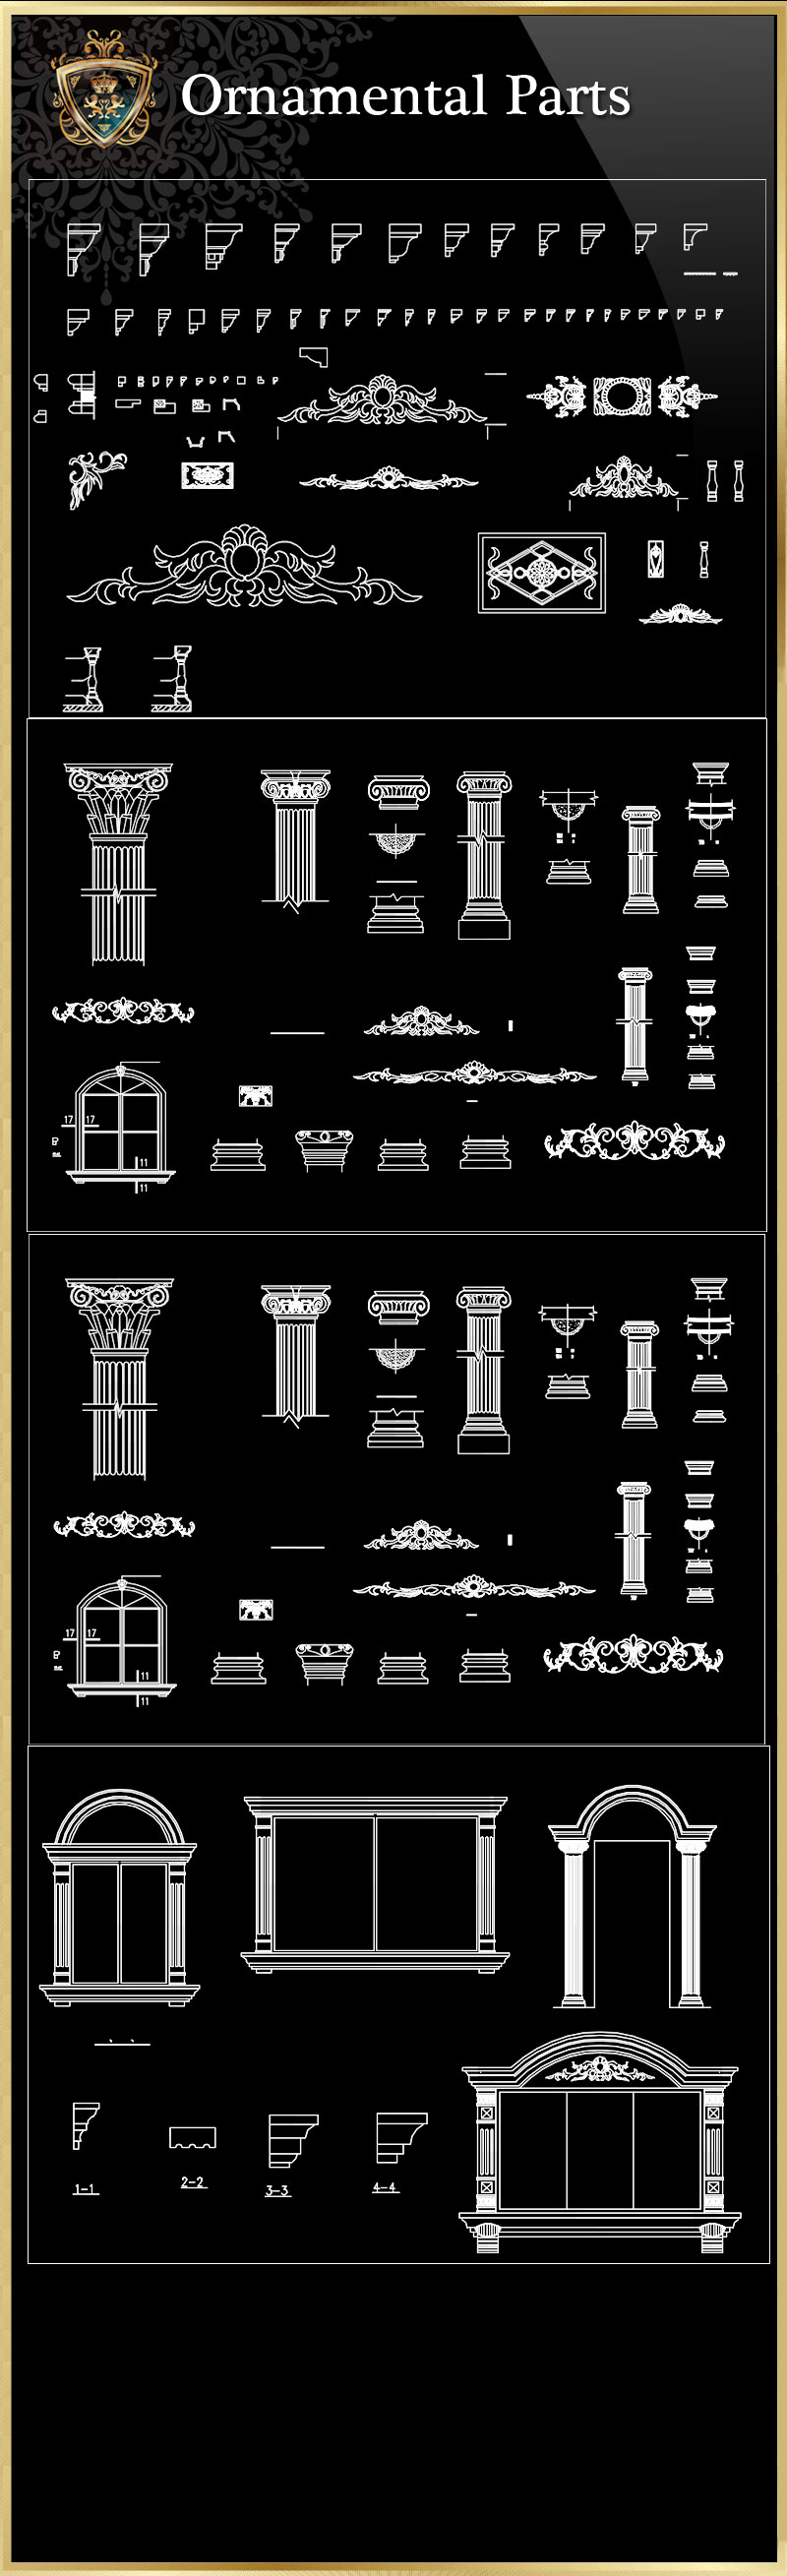 ★【Ornamental Parts of Buildings 8】Luxury home, Luxury Villas, Luxury Palace, Architecture Ornamental Parts, Decorative Inserts & Accessories, Handrail & Stairway Parts, Outdoor House Accessories, Euro Architectural Components, Arcade